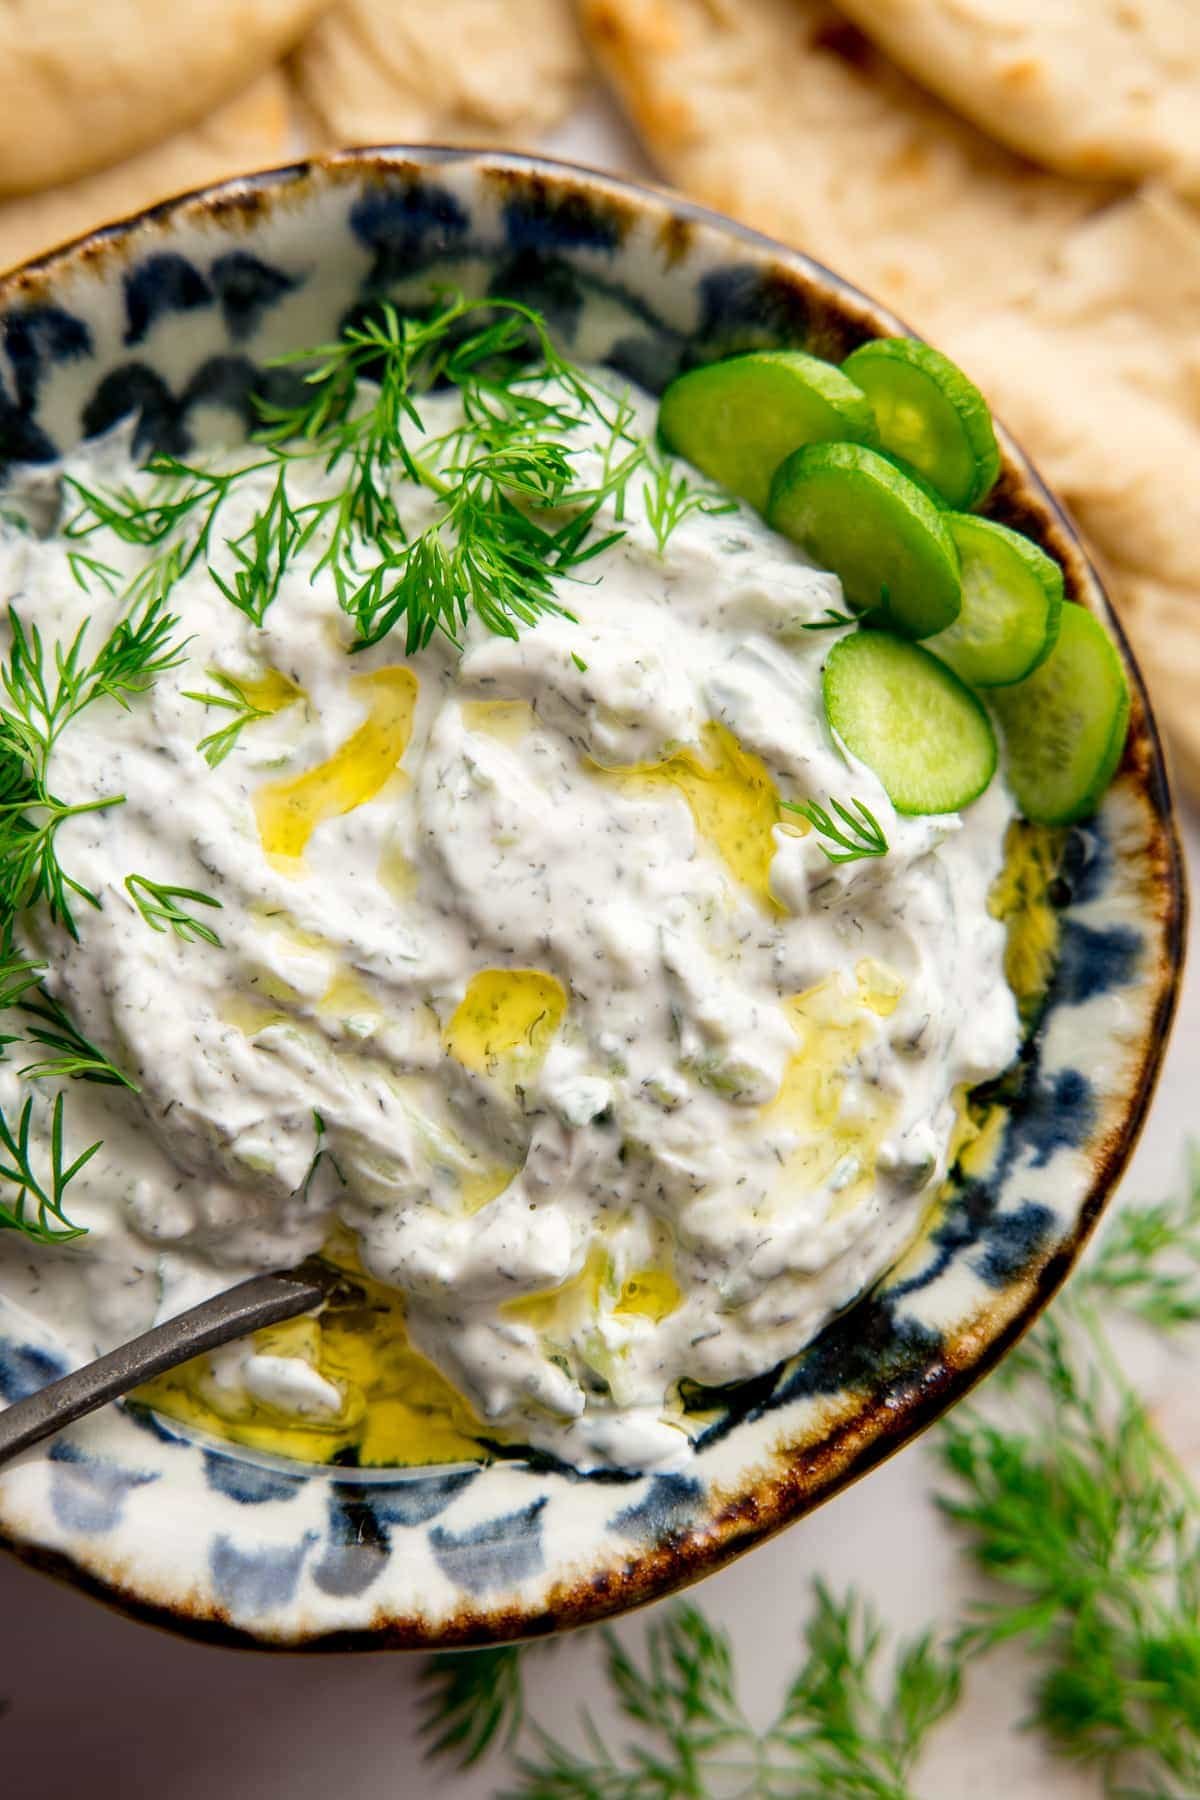 Tzatziki in a bowl on a light background